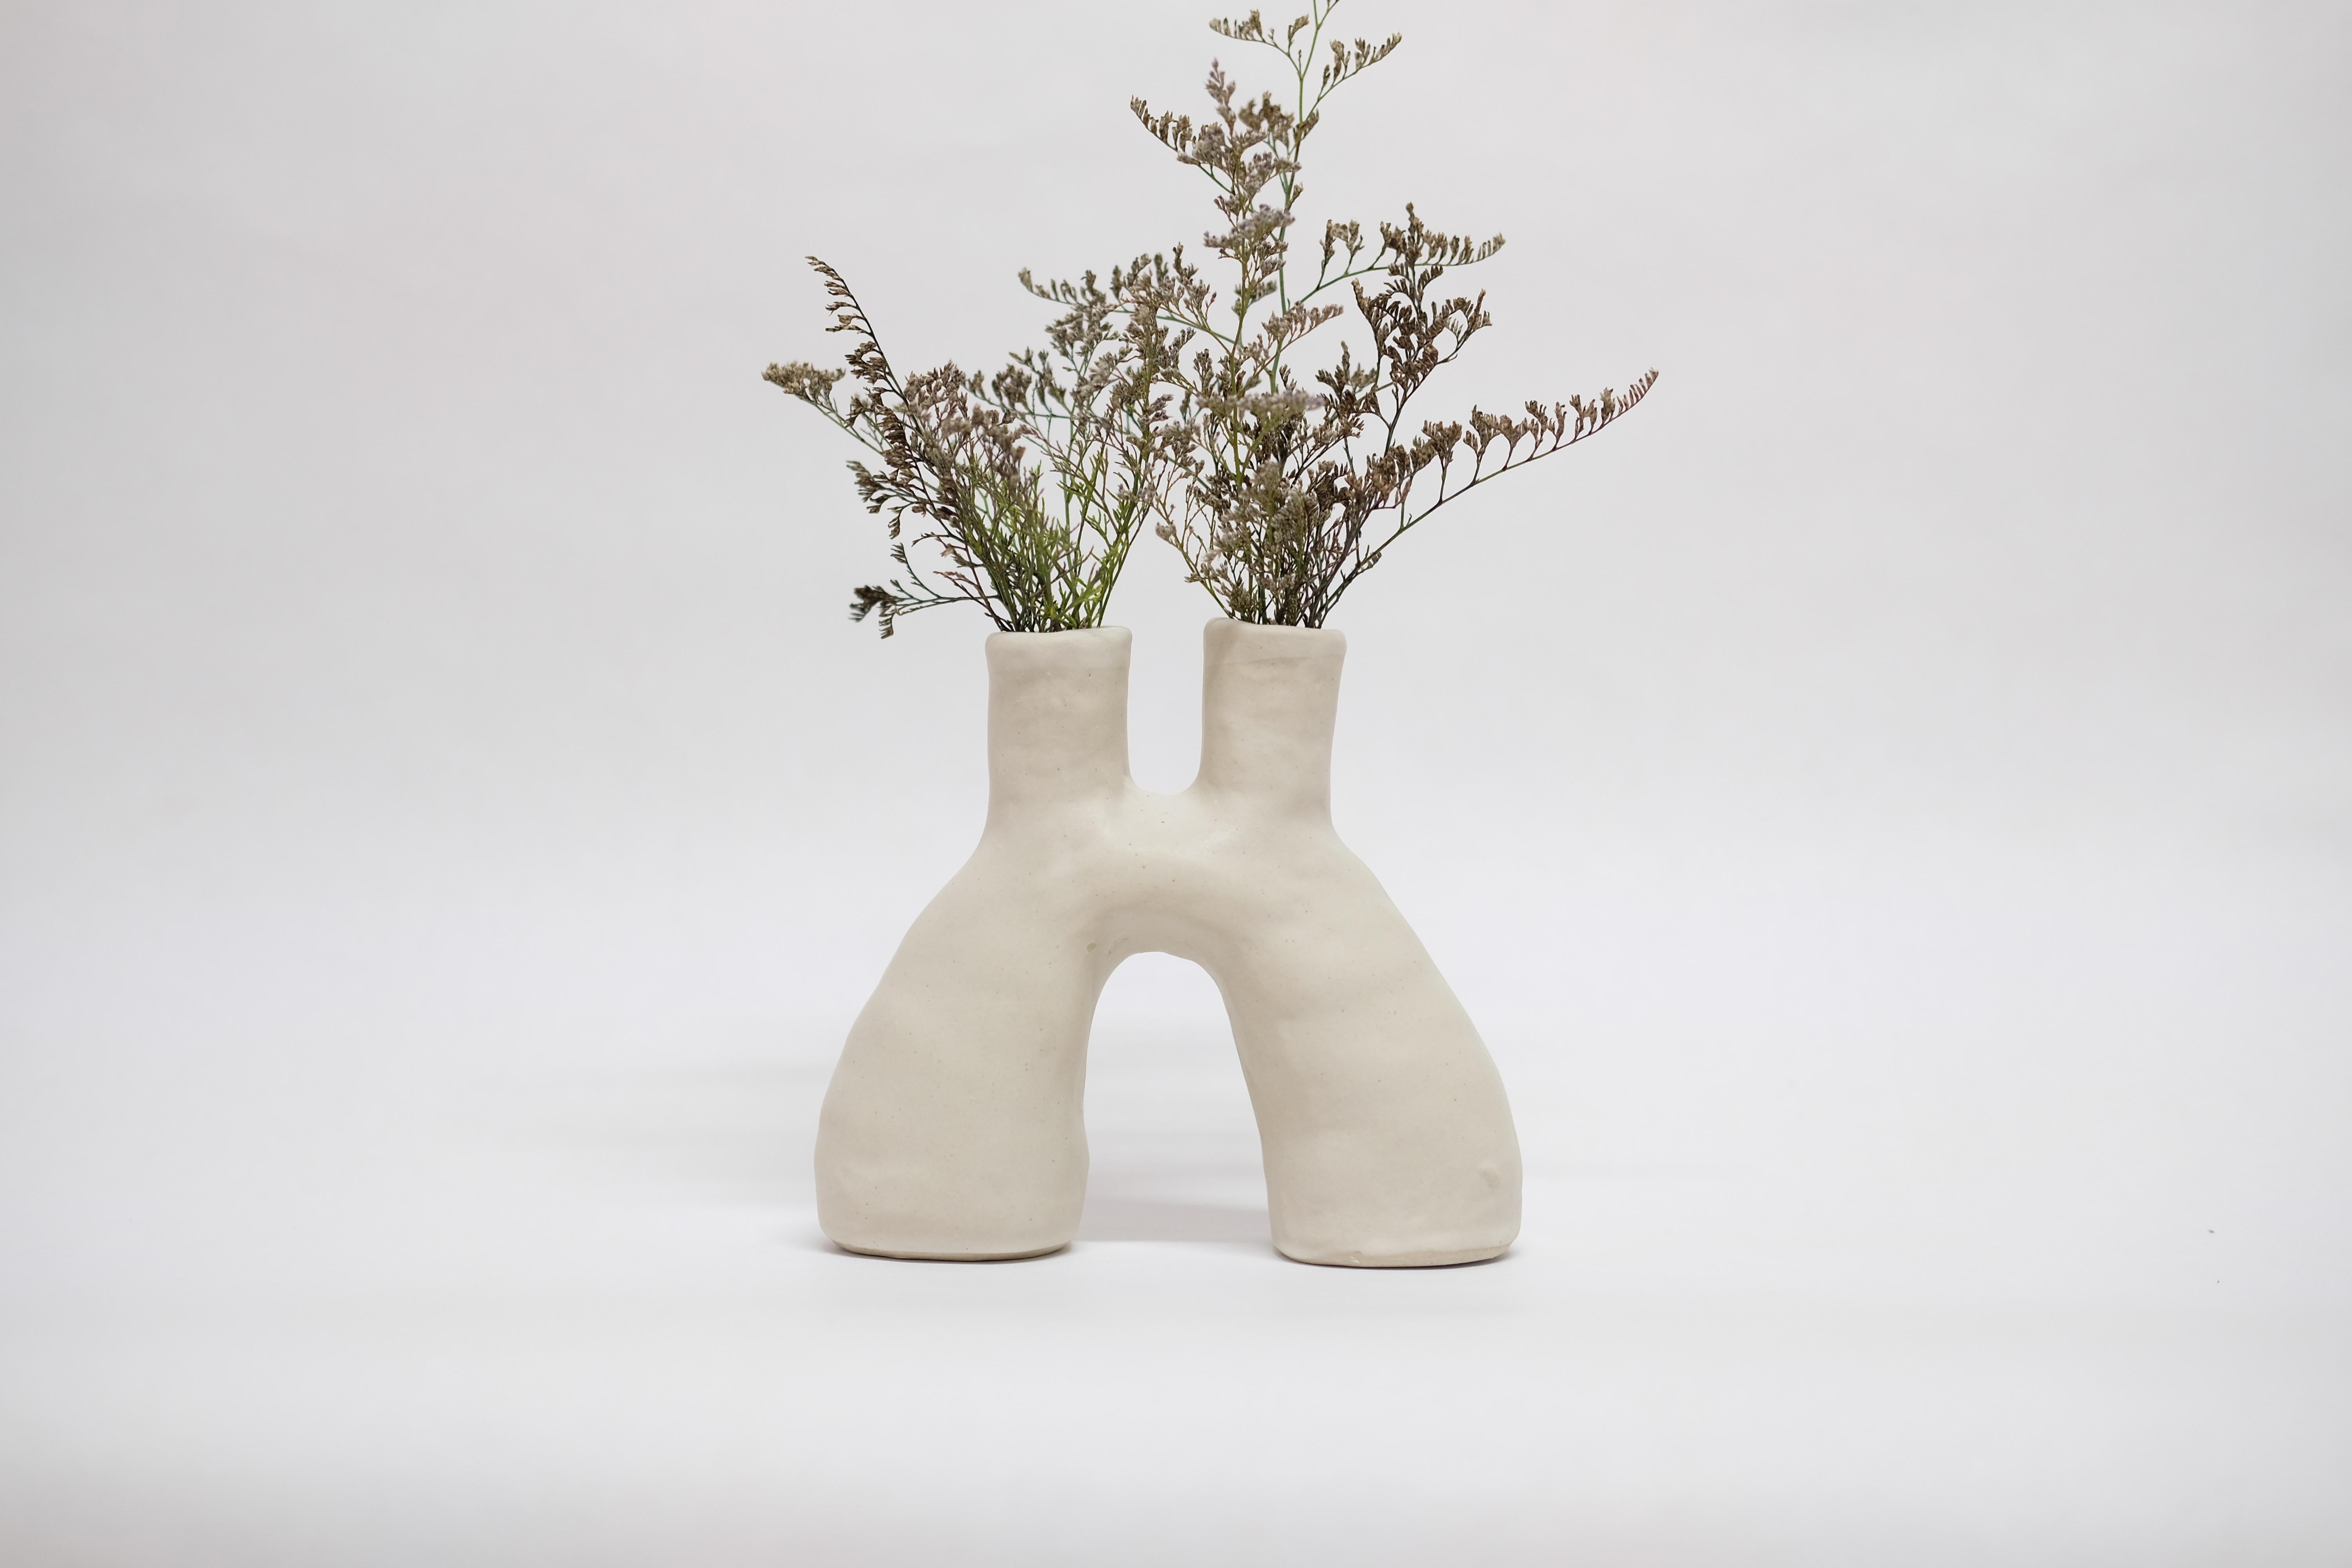 White portal stoneware vase by Camila Apaez
One of a kind
Materials: Stoneware
Dimensions: 7 x 17 x 14 cm
Options: White bone, butter milk, stone sage.

This year has been shaped by the topographies of our homes and the uncertainty of our